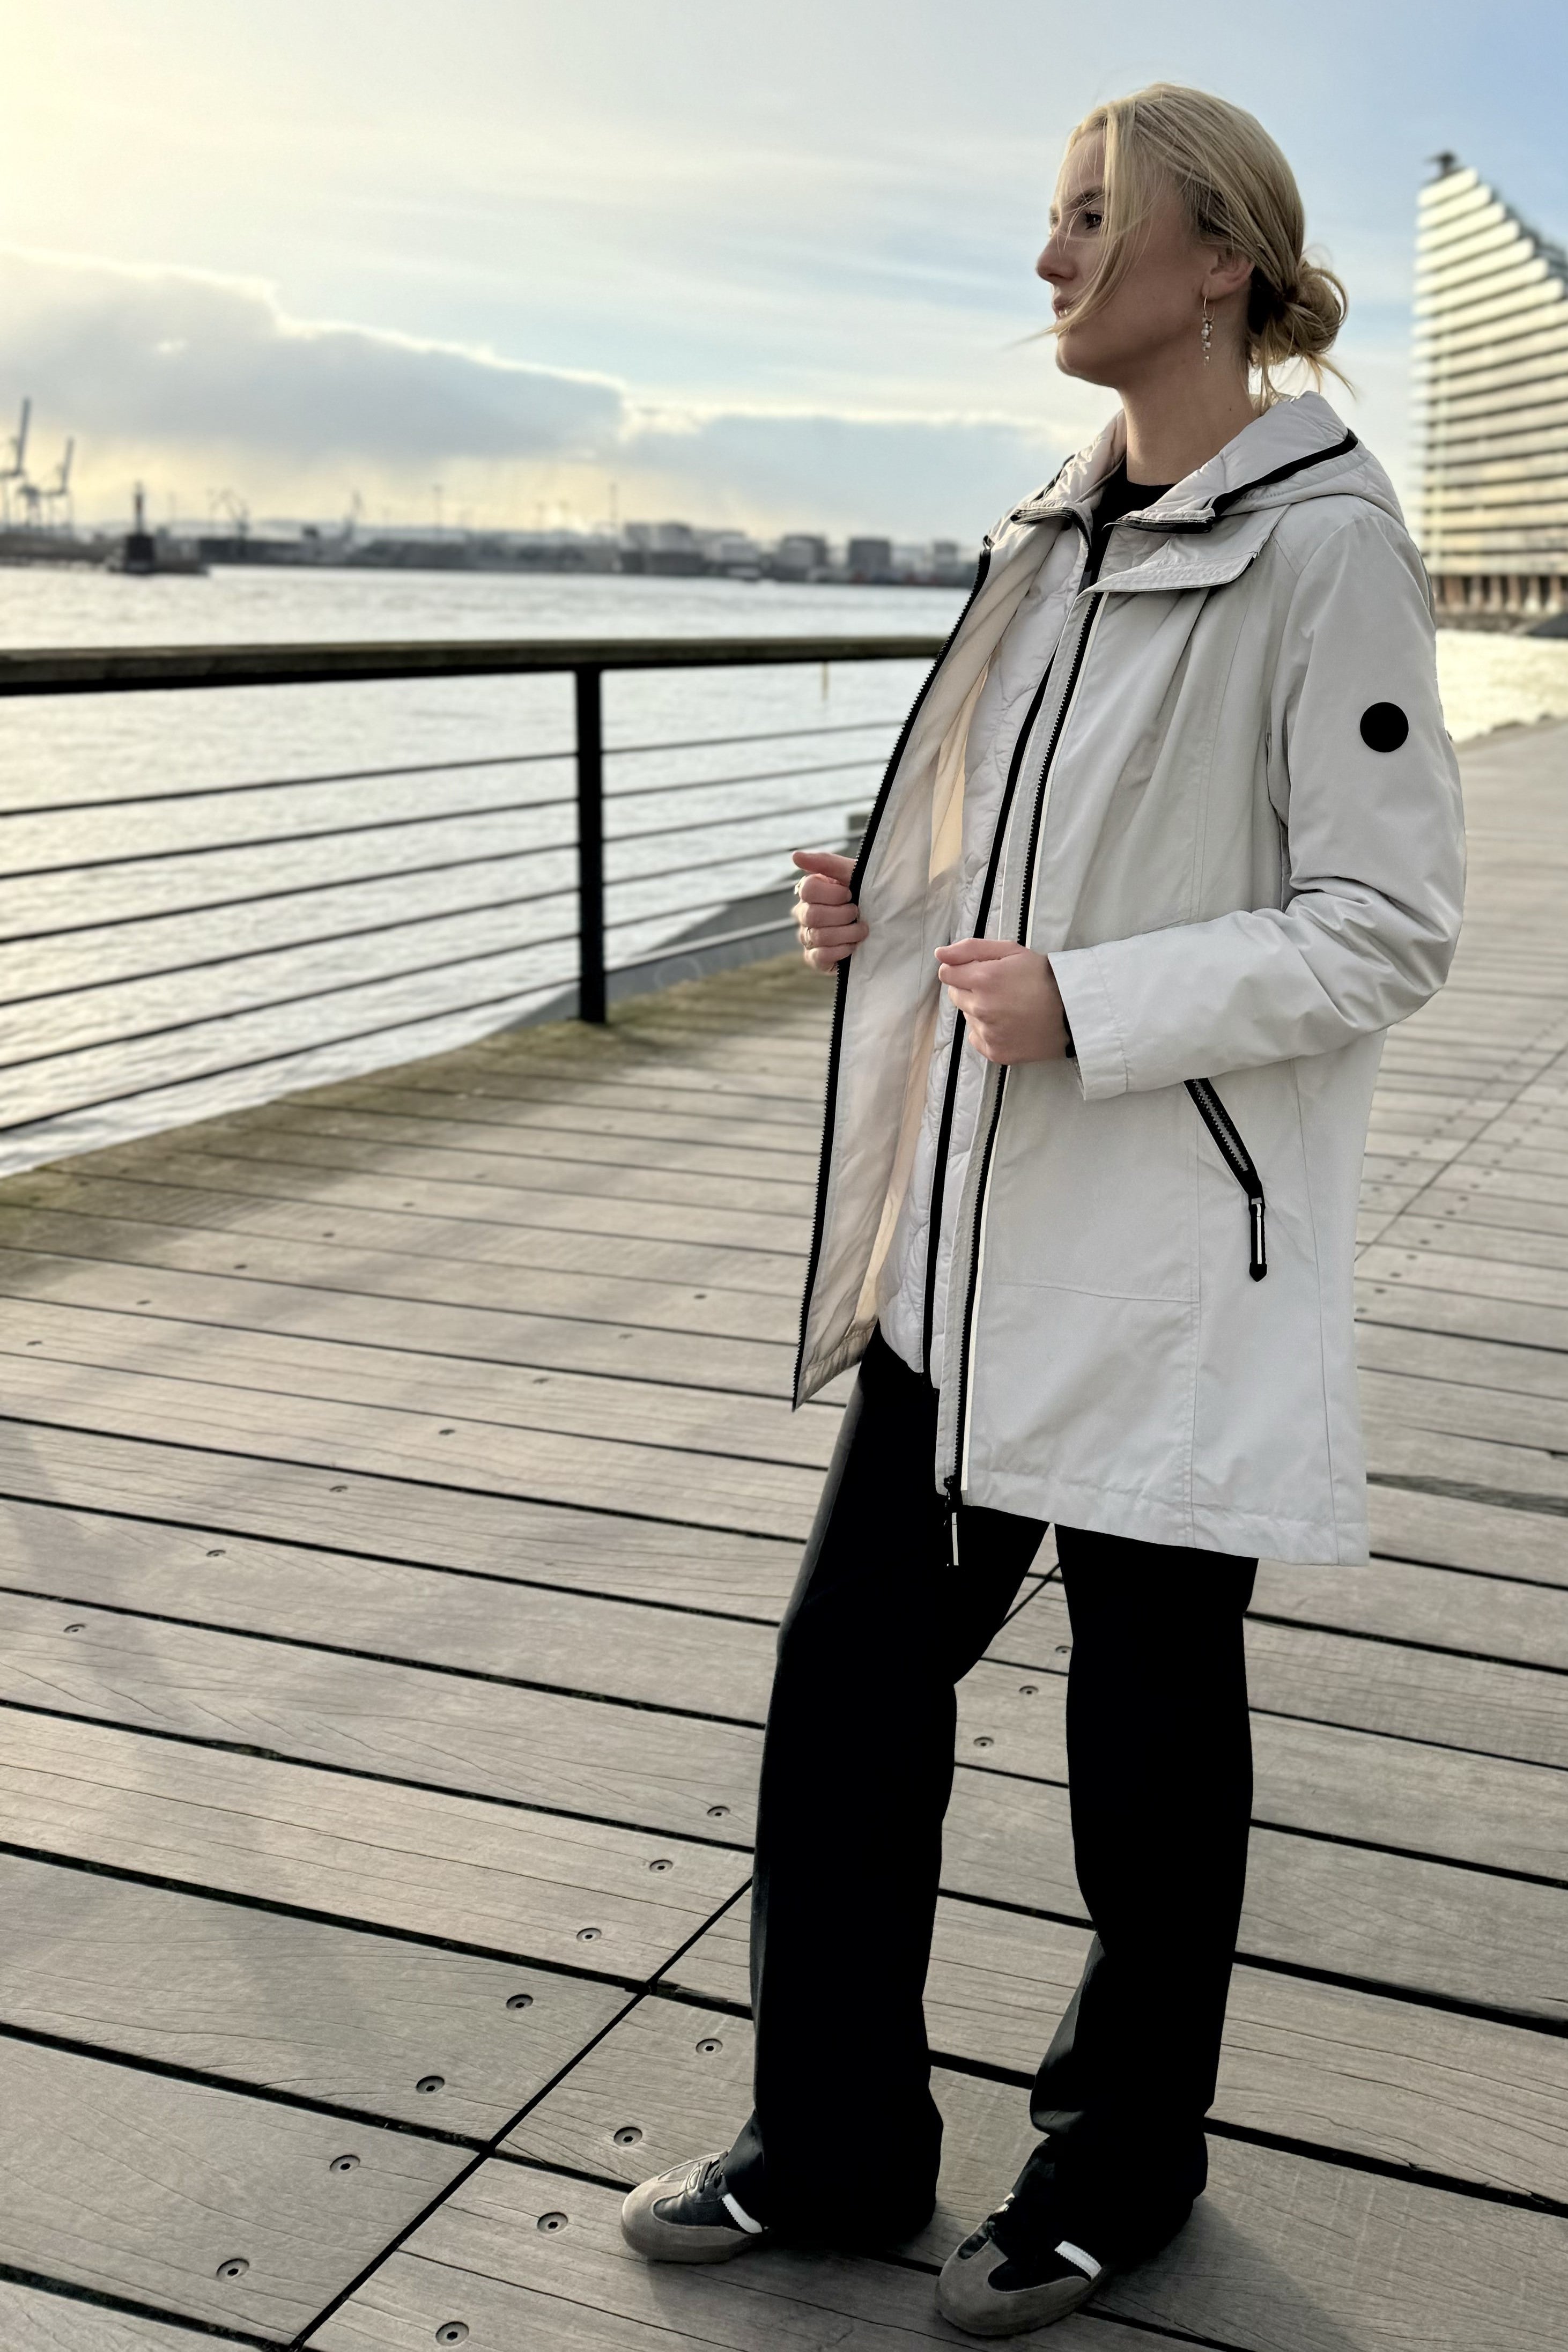 Everyday jacket from Junge - The functional jacket Honor